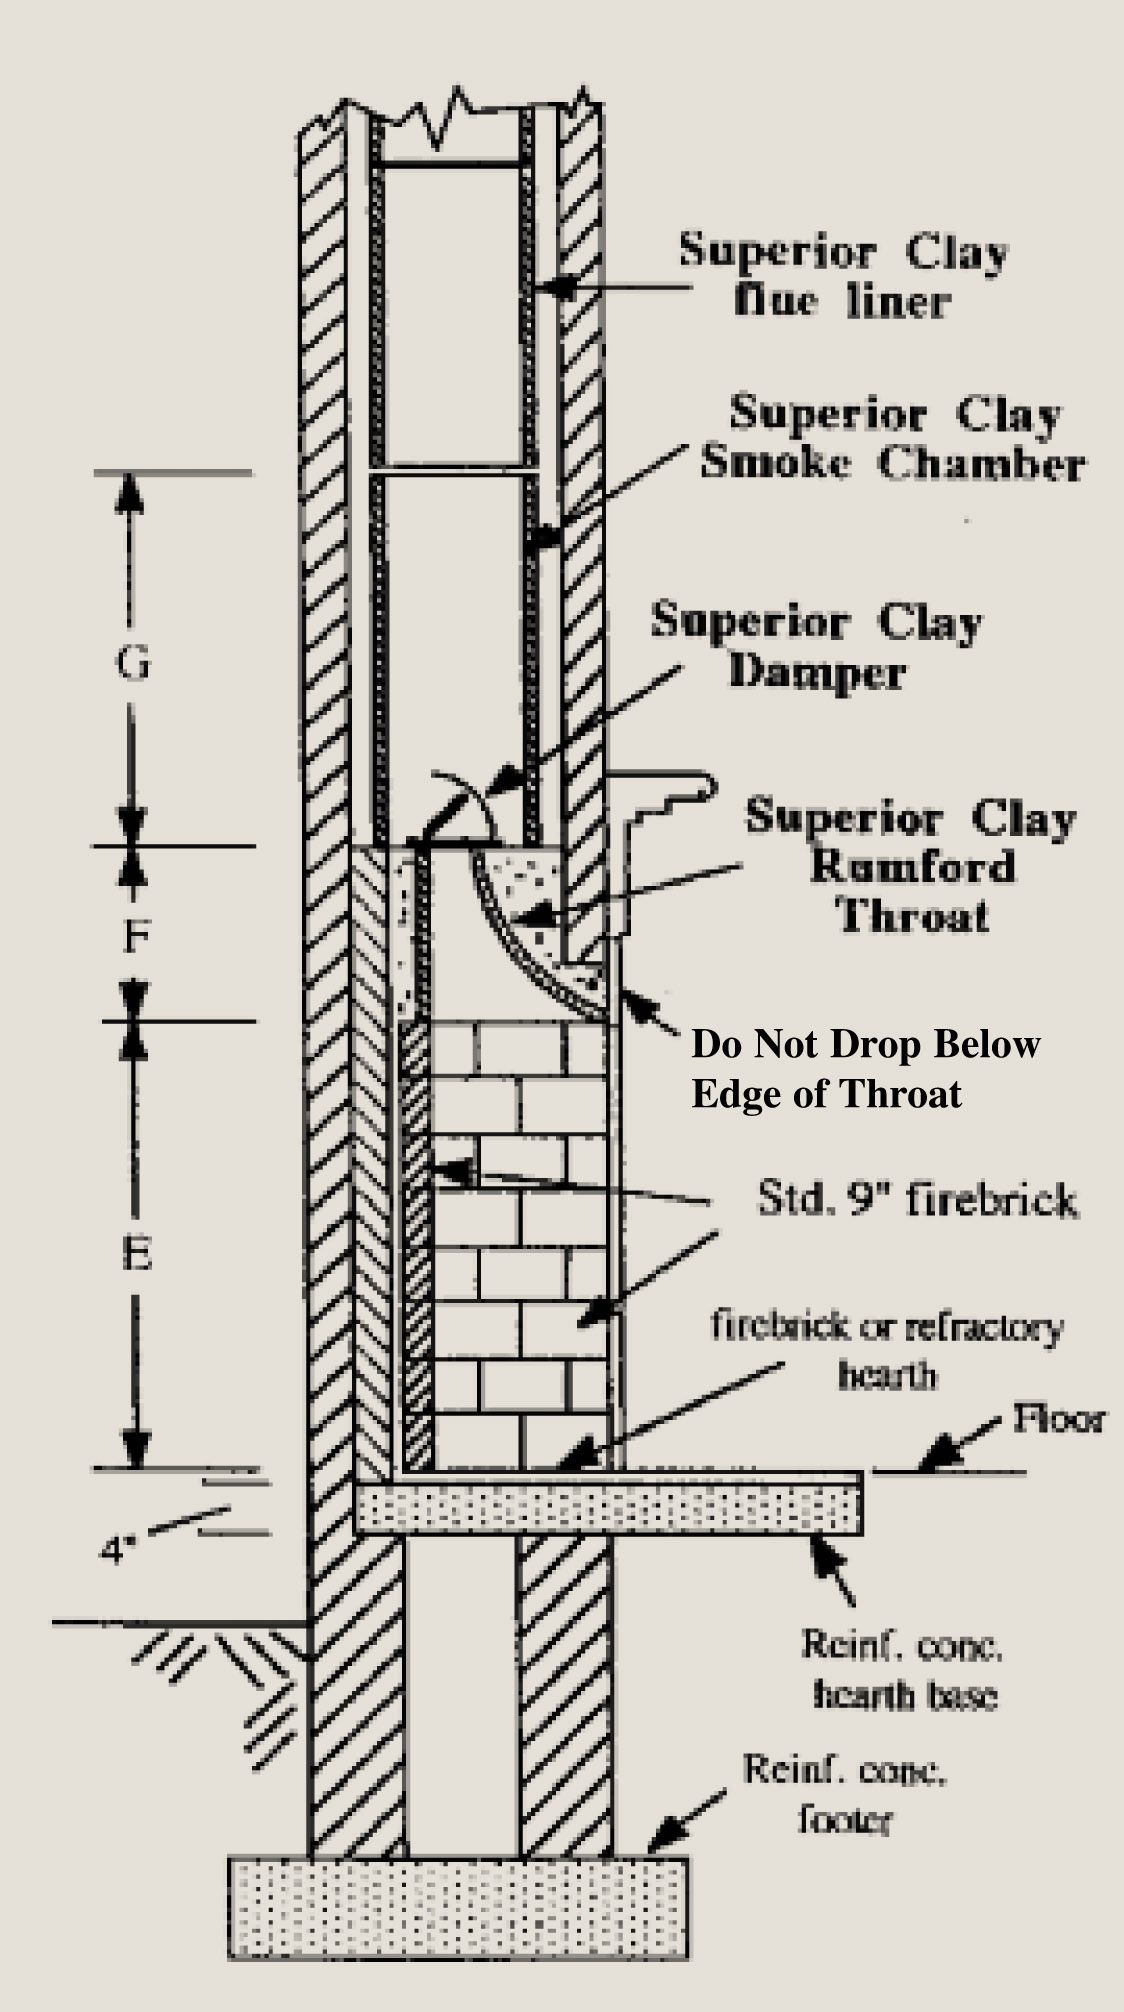 Standard Fireplace Dimensions Fresh Rumford Plans and Instructions Superior Clay